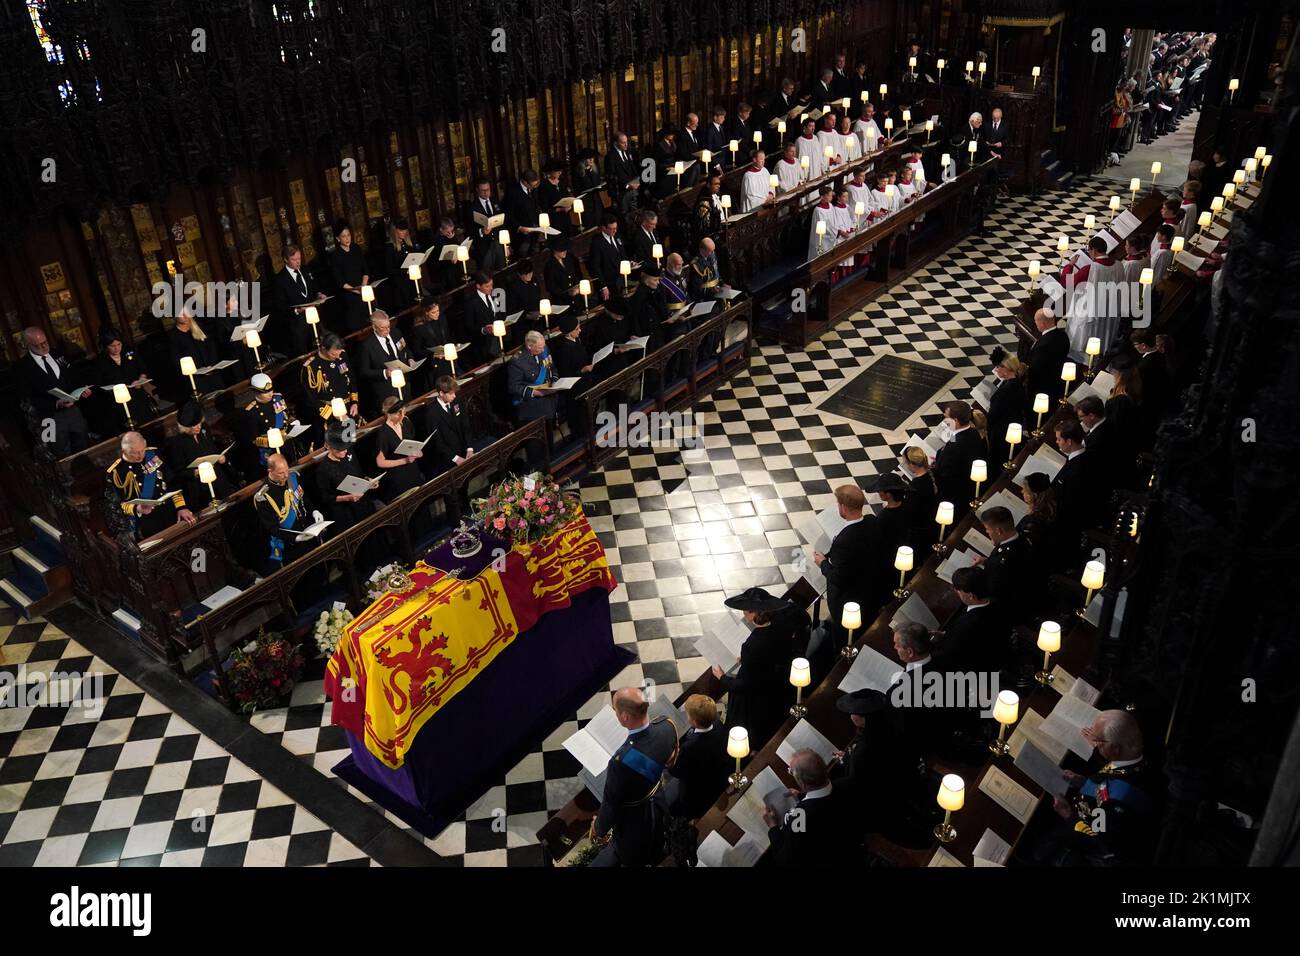 The coffin of Queen Elizabeth II draped in the Royal Standard with the Imperial State Crown and the Sovereign's orb and sceptre, in front of (front row, left to right) the Earl of Wessex, the Countess of Wessex, Lady Louise Windsor, James, Viscount Severn, the Duke of Gloucester, the Duchess of Gloucester, Princess Alexandra, Princess Michael of Kent, Prince Michael of Kent and the Duke of Kent, (middle row, left to right) King Charles III, the Queen Consort, the Princess Royal, Vice Admiral Sir Tim Laurence, the Duke of York, Princess Beatrice, Edoardo Mapelli Mozzi, Sarah, Duchess of York, P Stock Photo